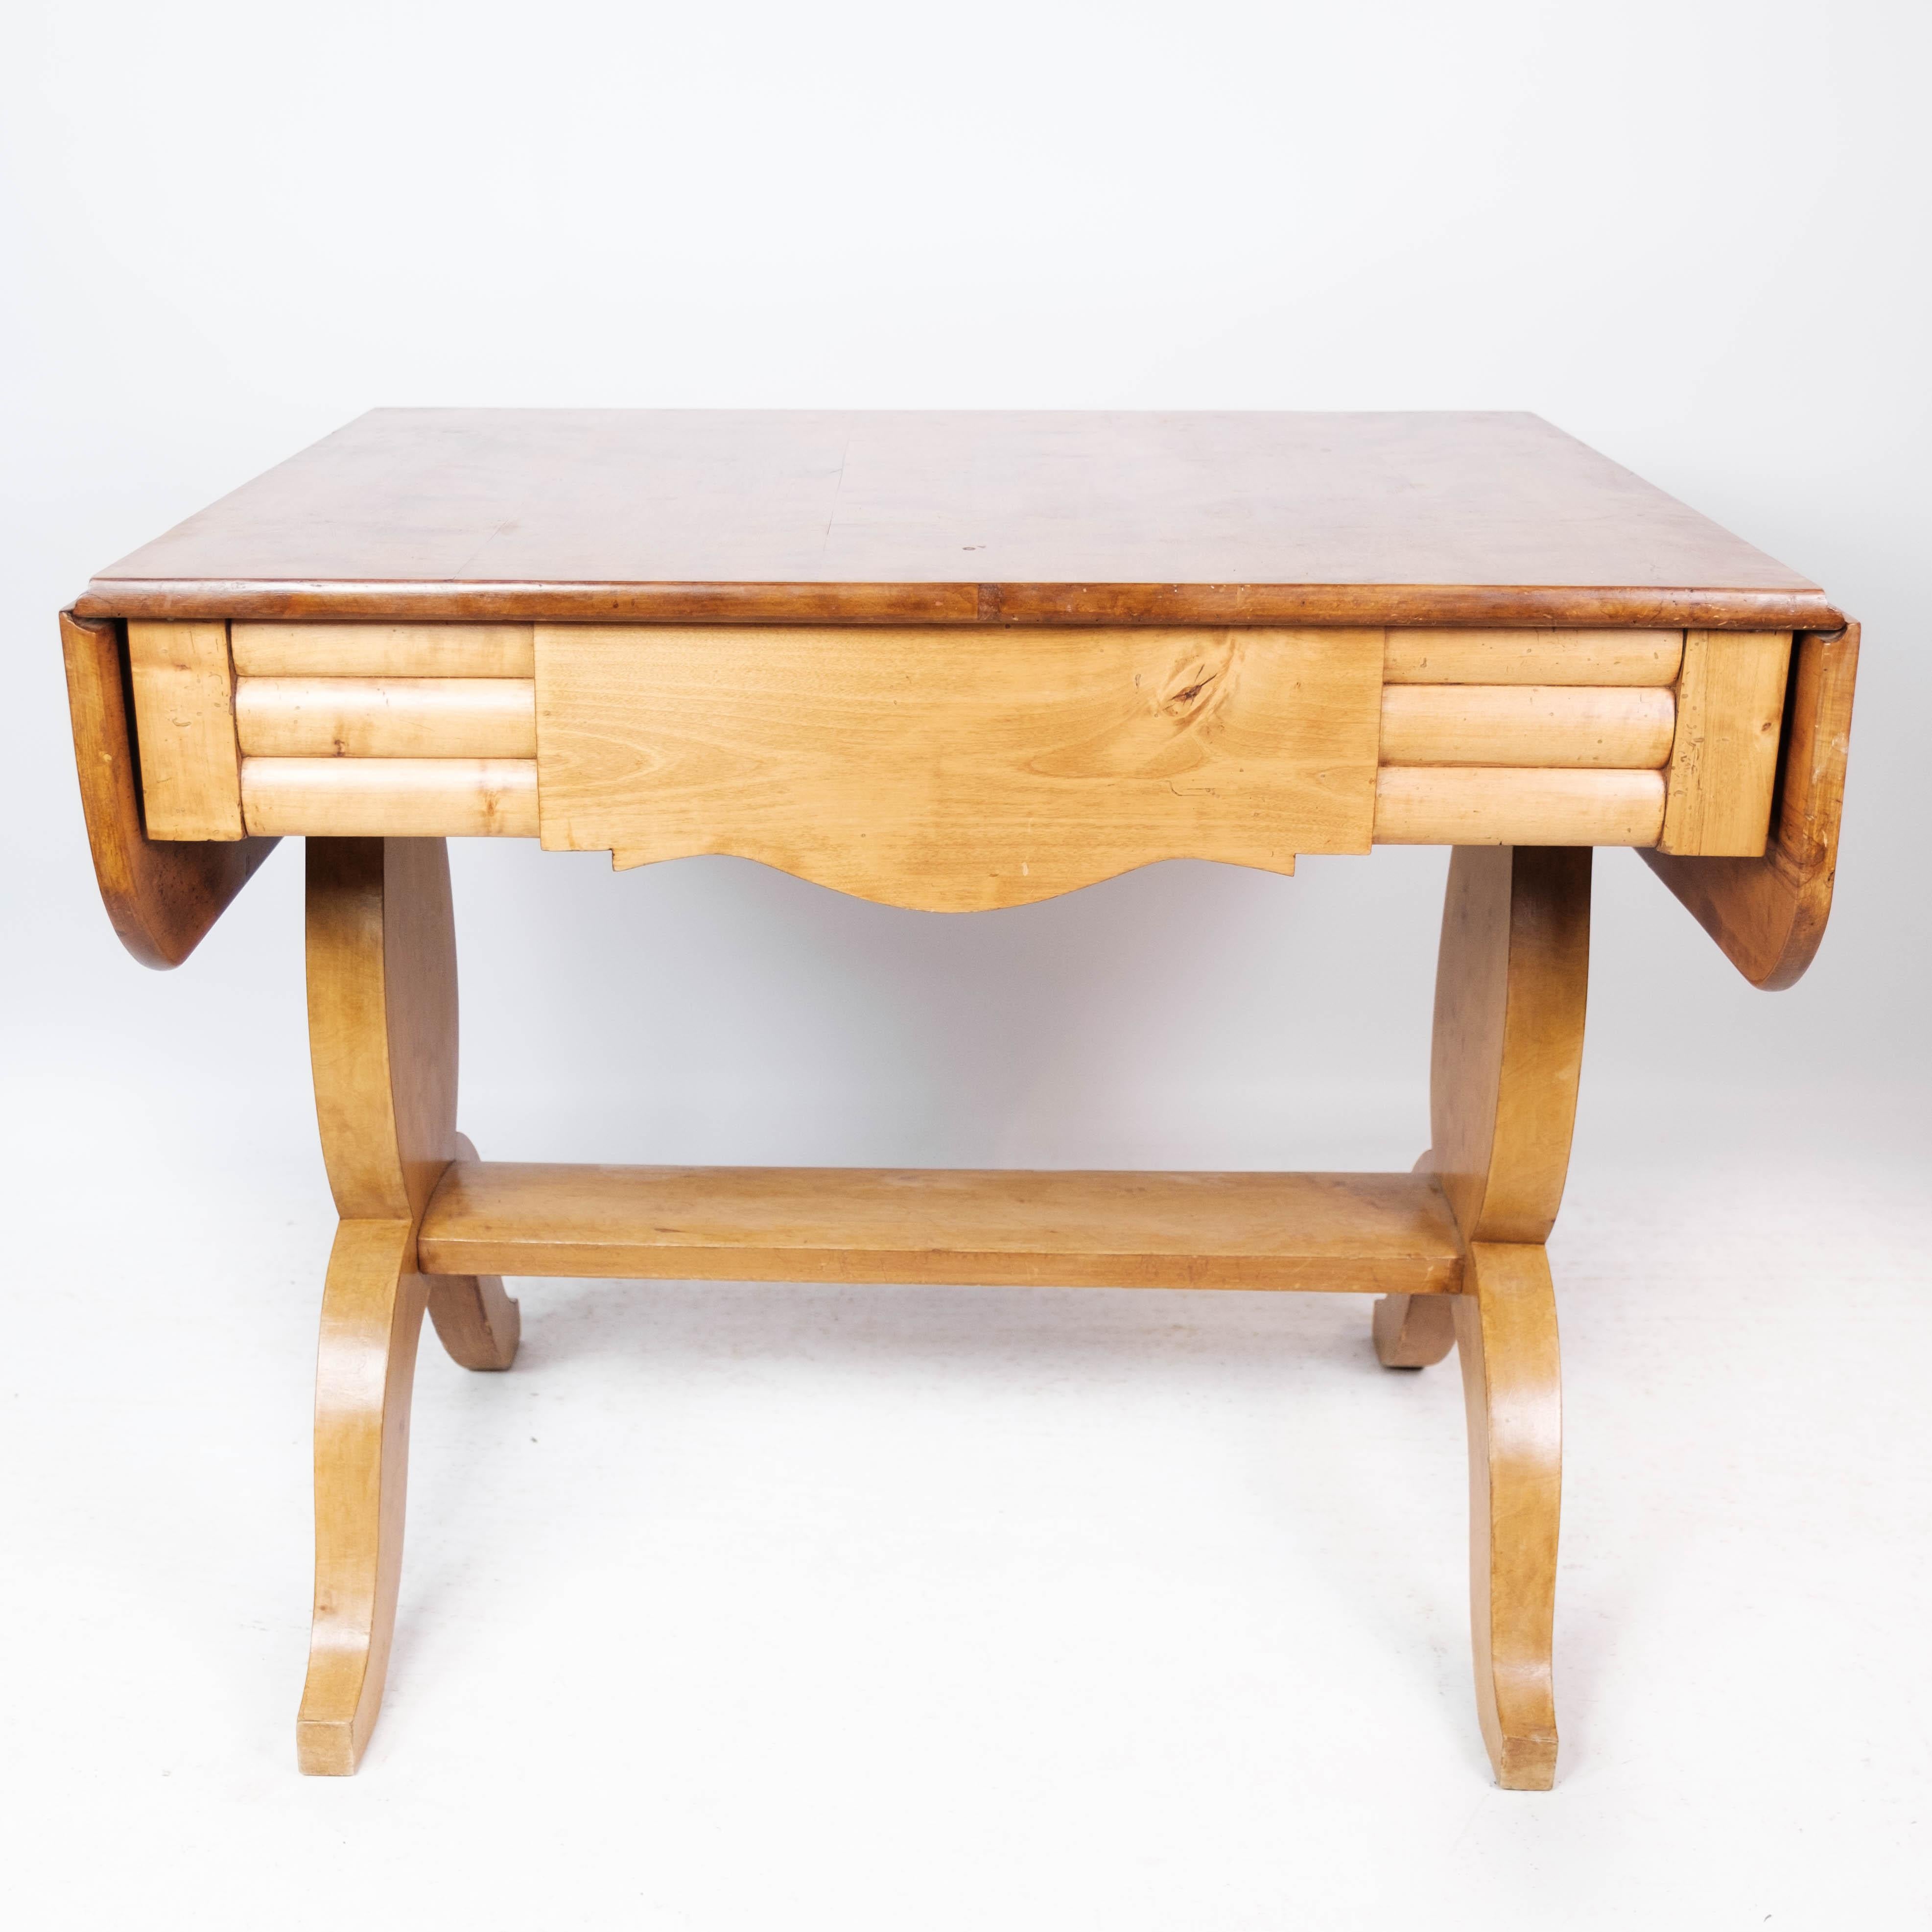 The dining table, crafted from birchwood, stands as a testament to the elegance and craftsmanship of the mid-19th century. Dating back to around 1840, this exquisite piece is in superb antique condition, showcasing its enduring beauty and